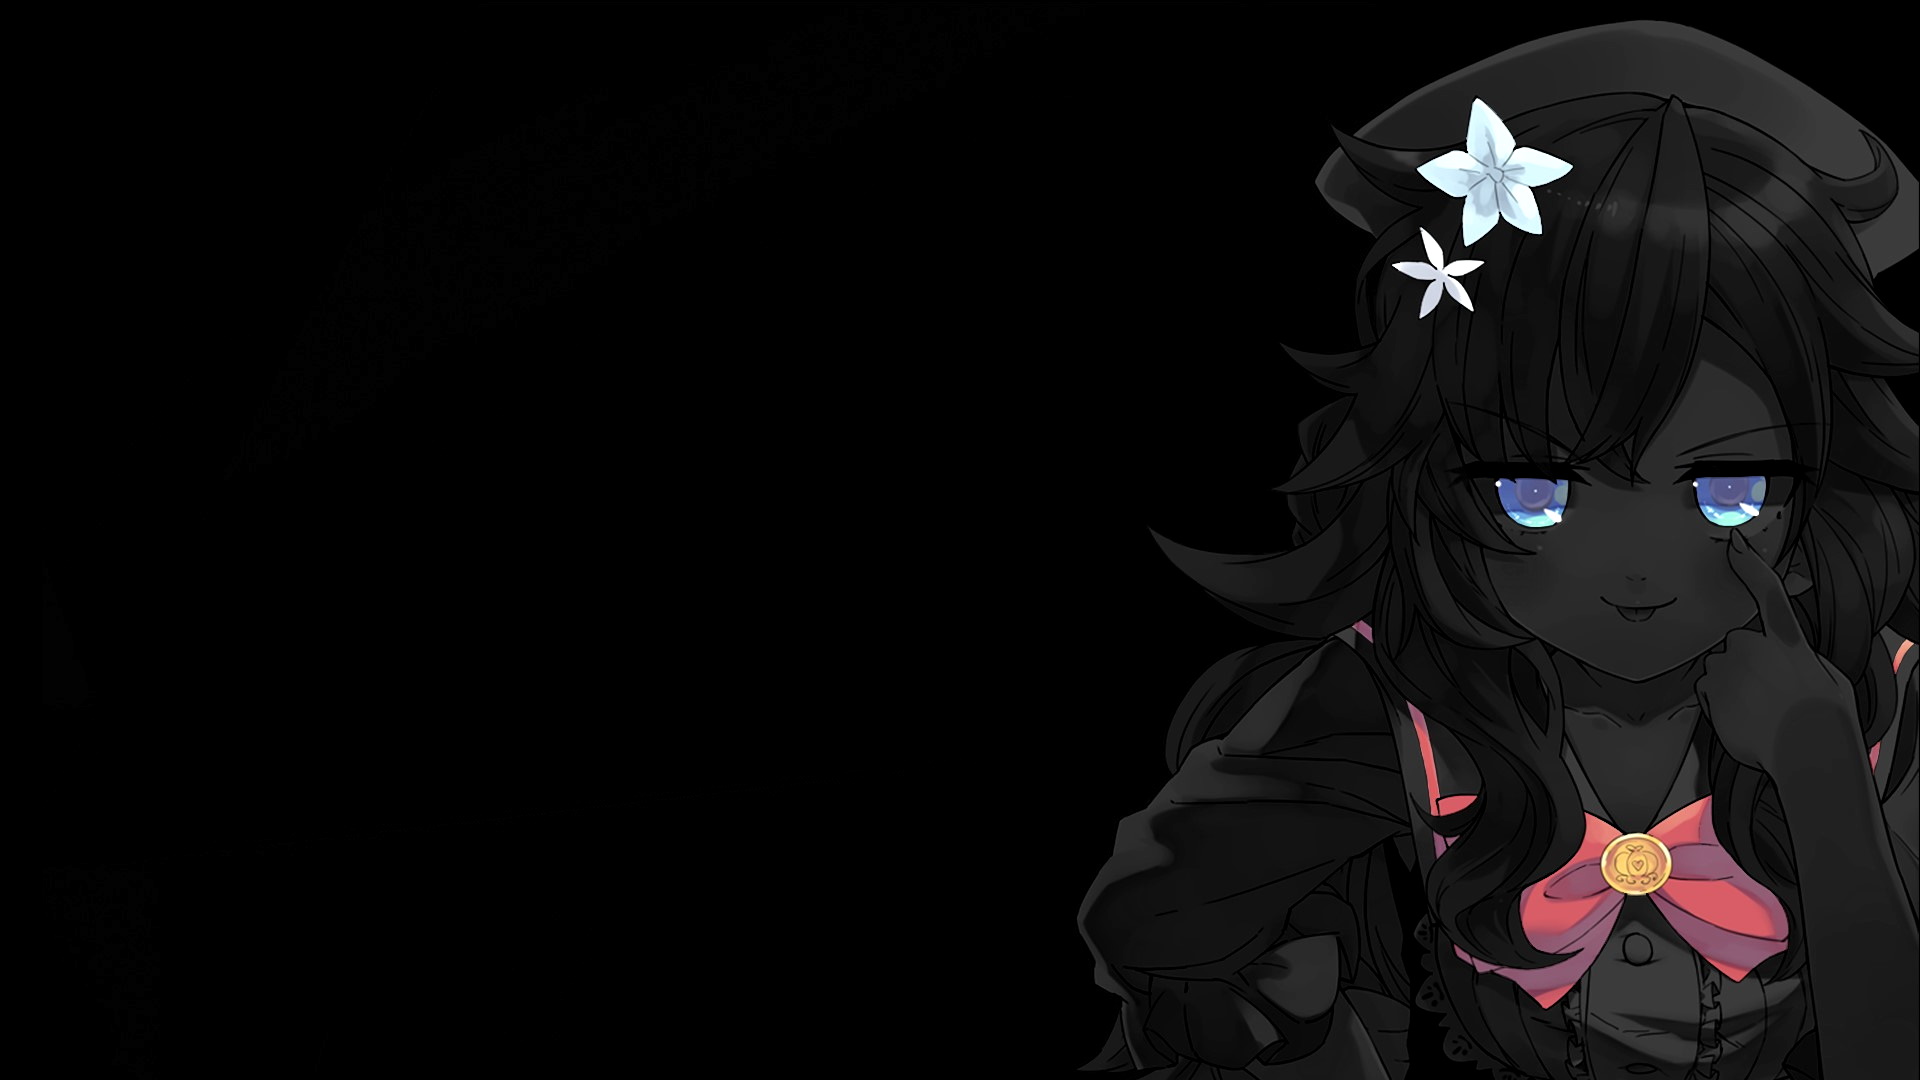 Anime 1920x1080 black background dark background simple background selective coloring anime girls Hololive